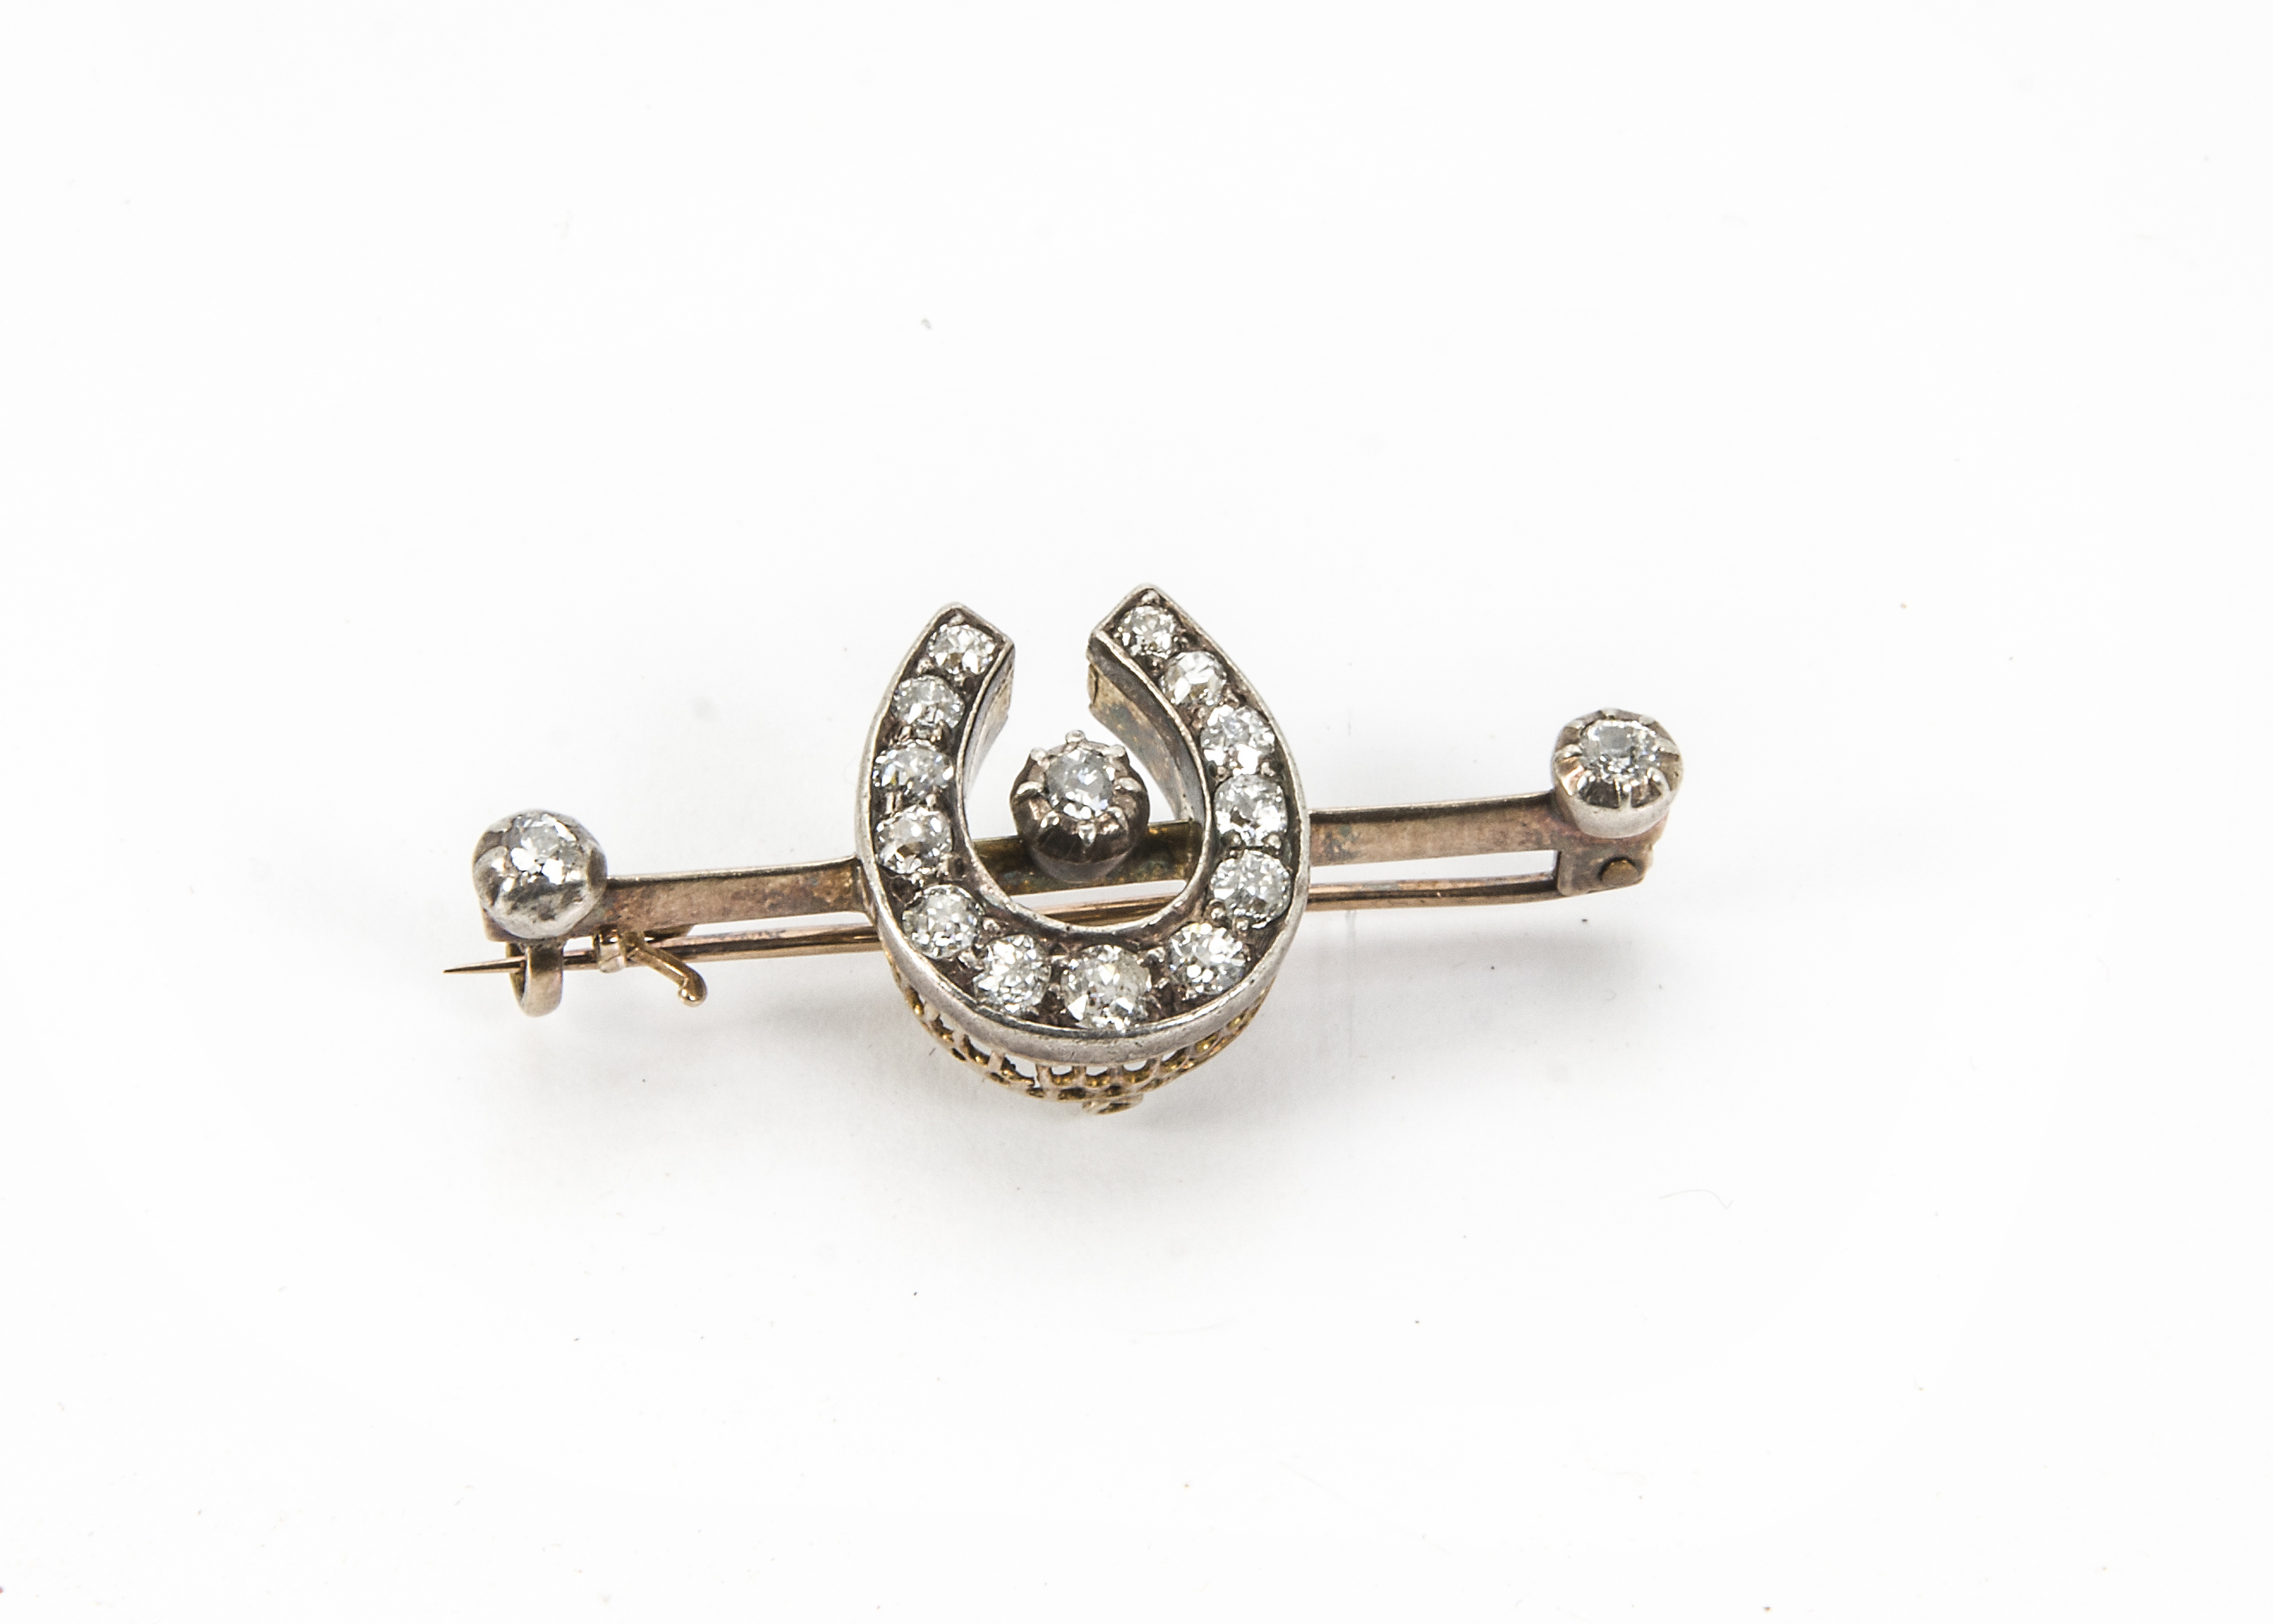 A Victorian diamond brooch, the silver and gold mount having old cut diamonds to the horseshoe and